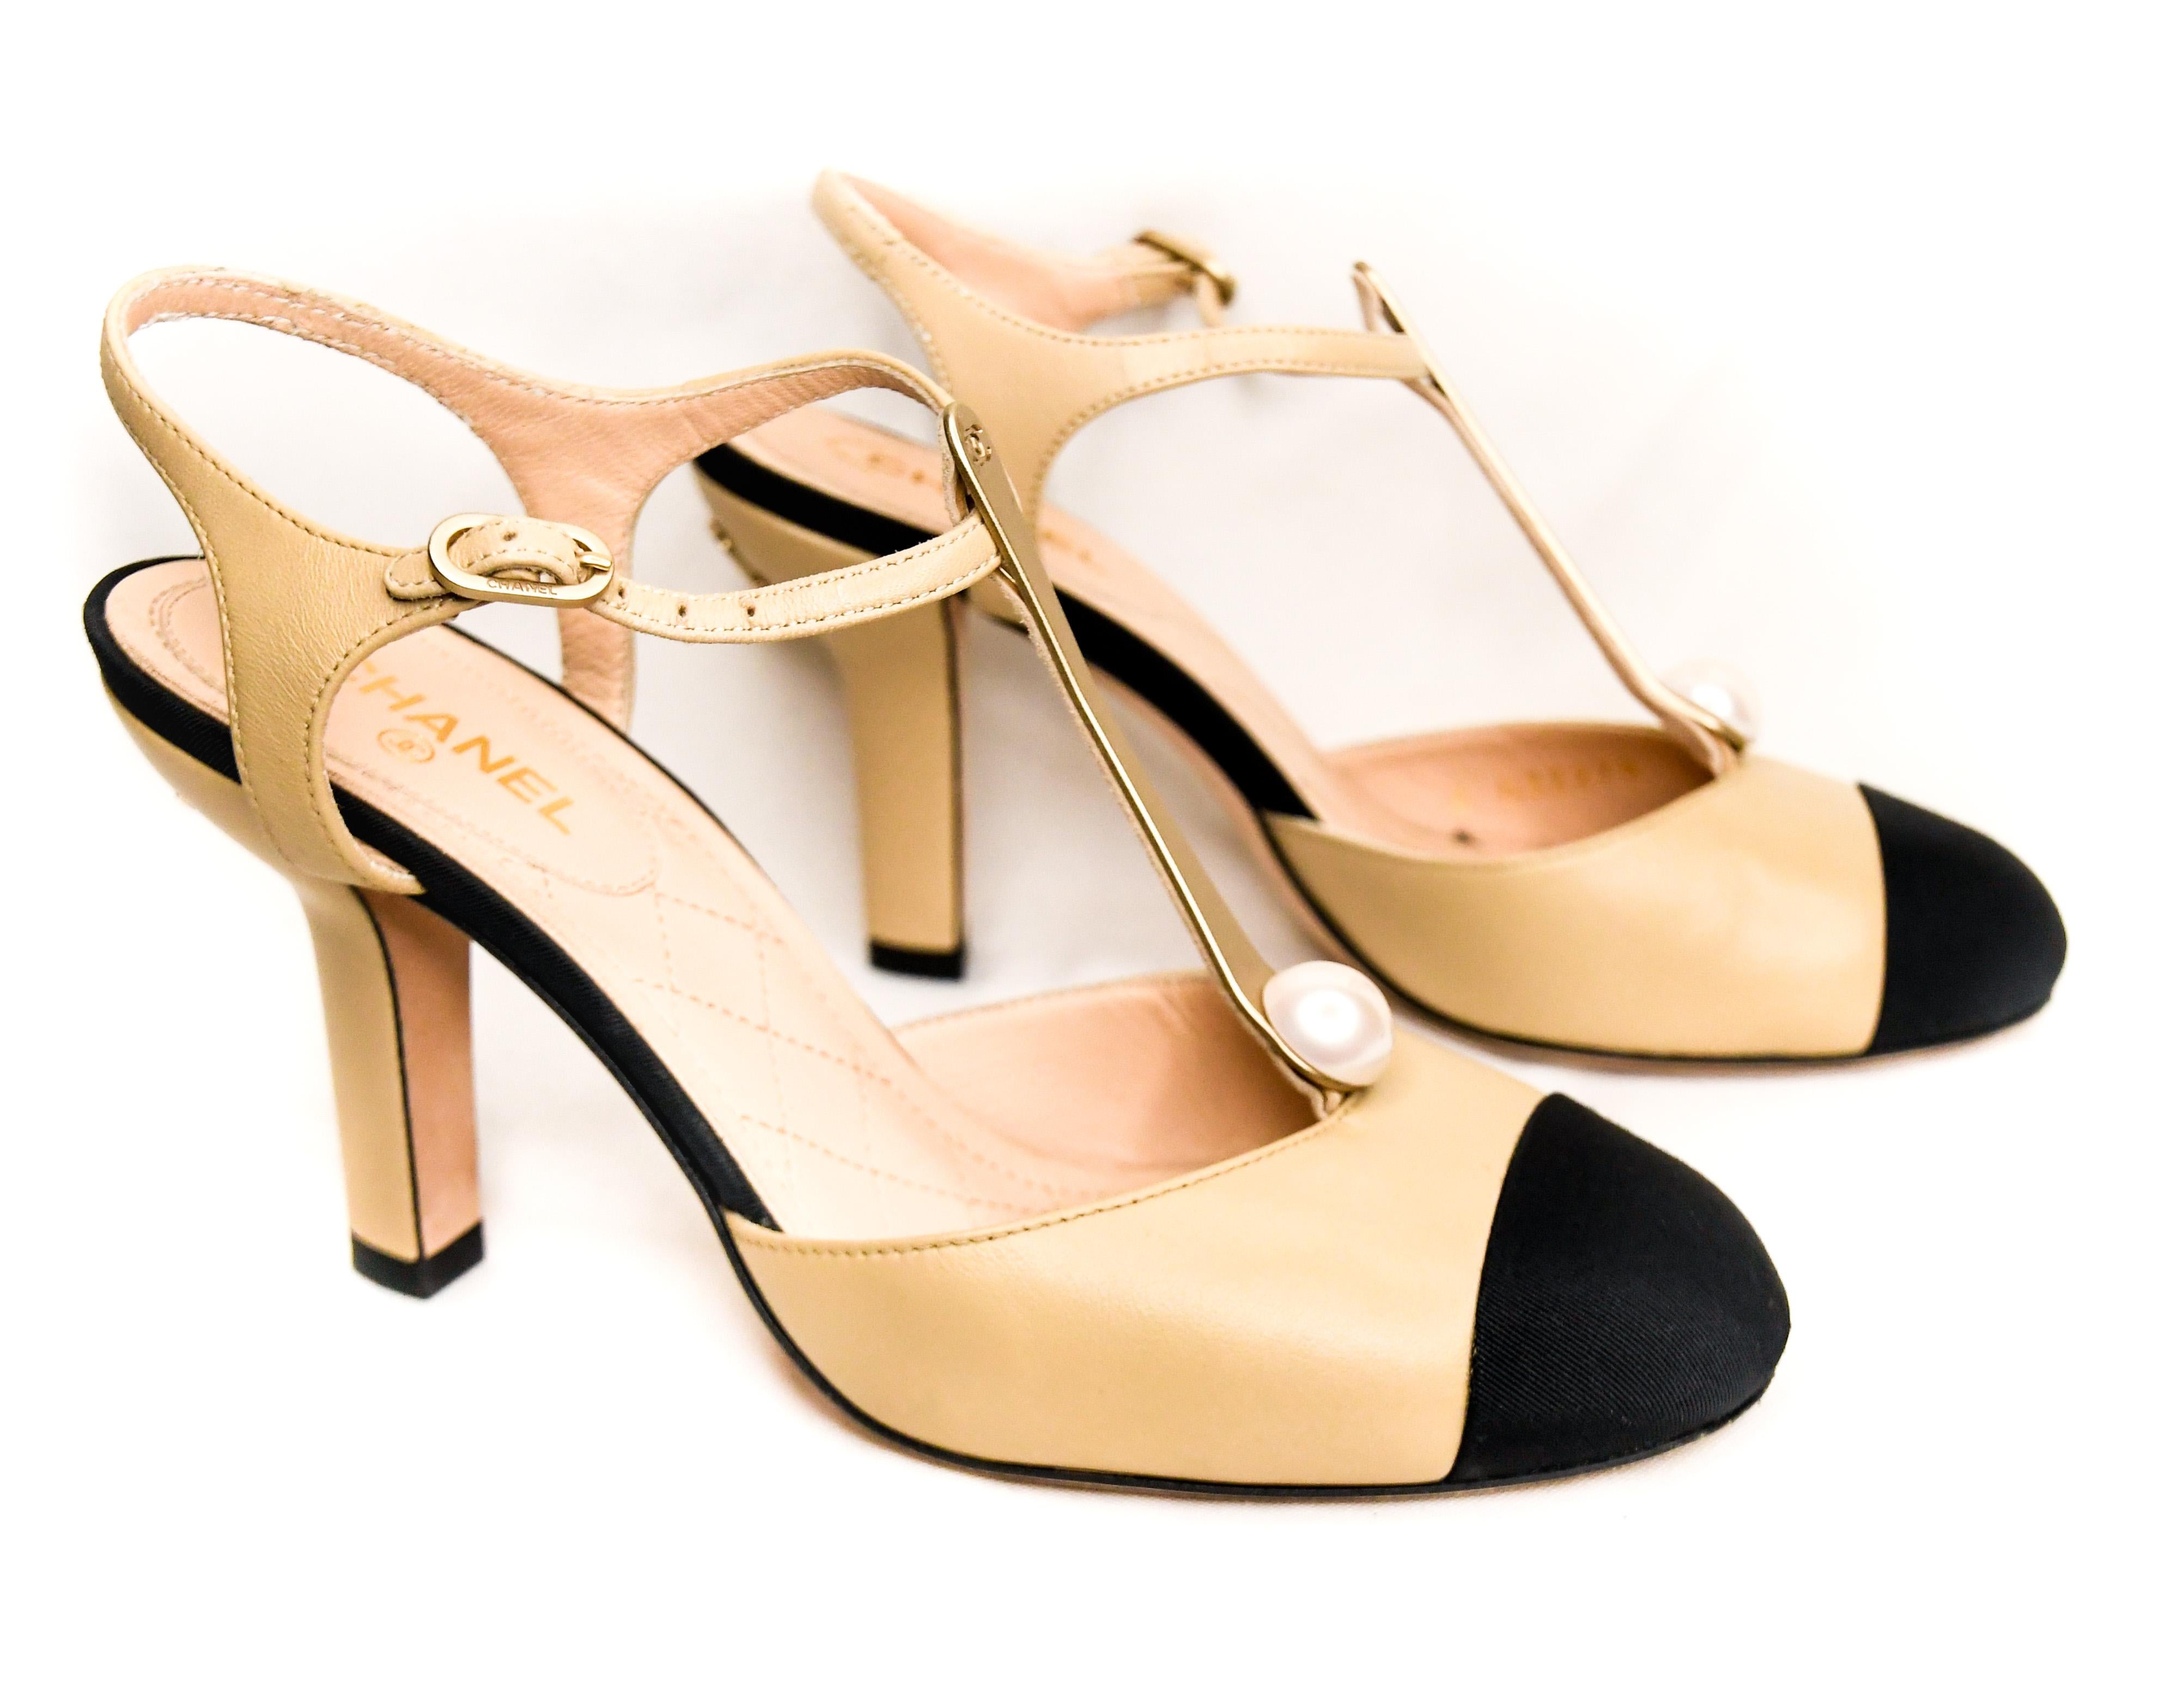 Classic Chanel T Strap shoes are worthy of Coco herself!  Features included signature tan leather and black grosgrain capped toes, sculpted heels  and matte gold tone hardware.  Adjustable ankle straps.  Leather padded insoles and soles.  Pearls at